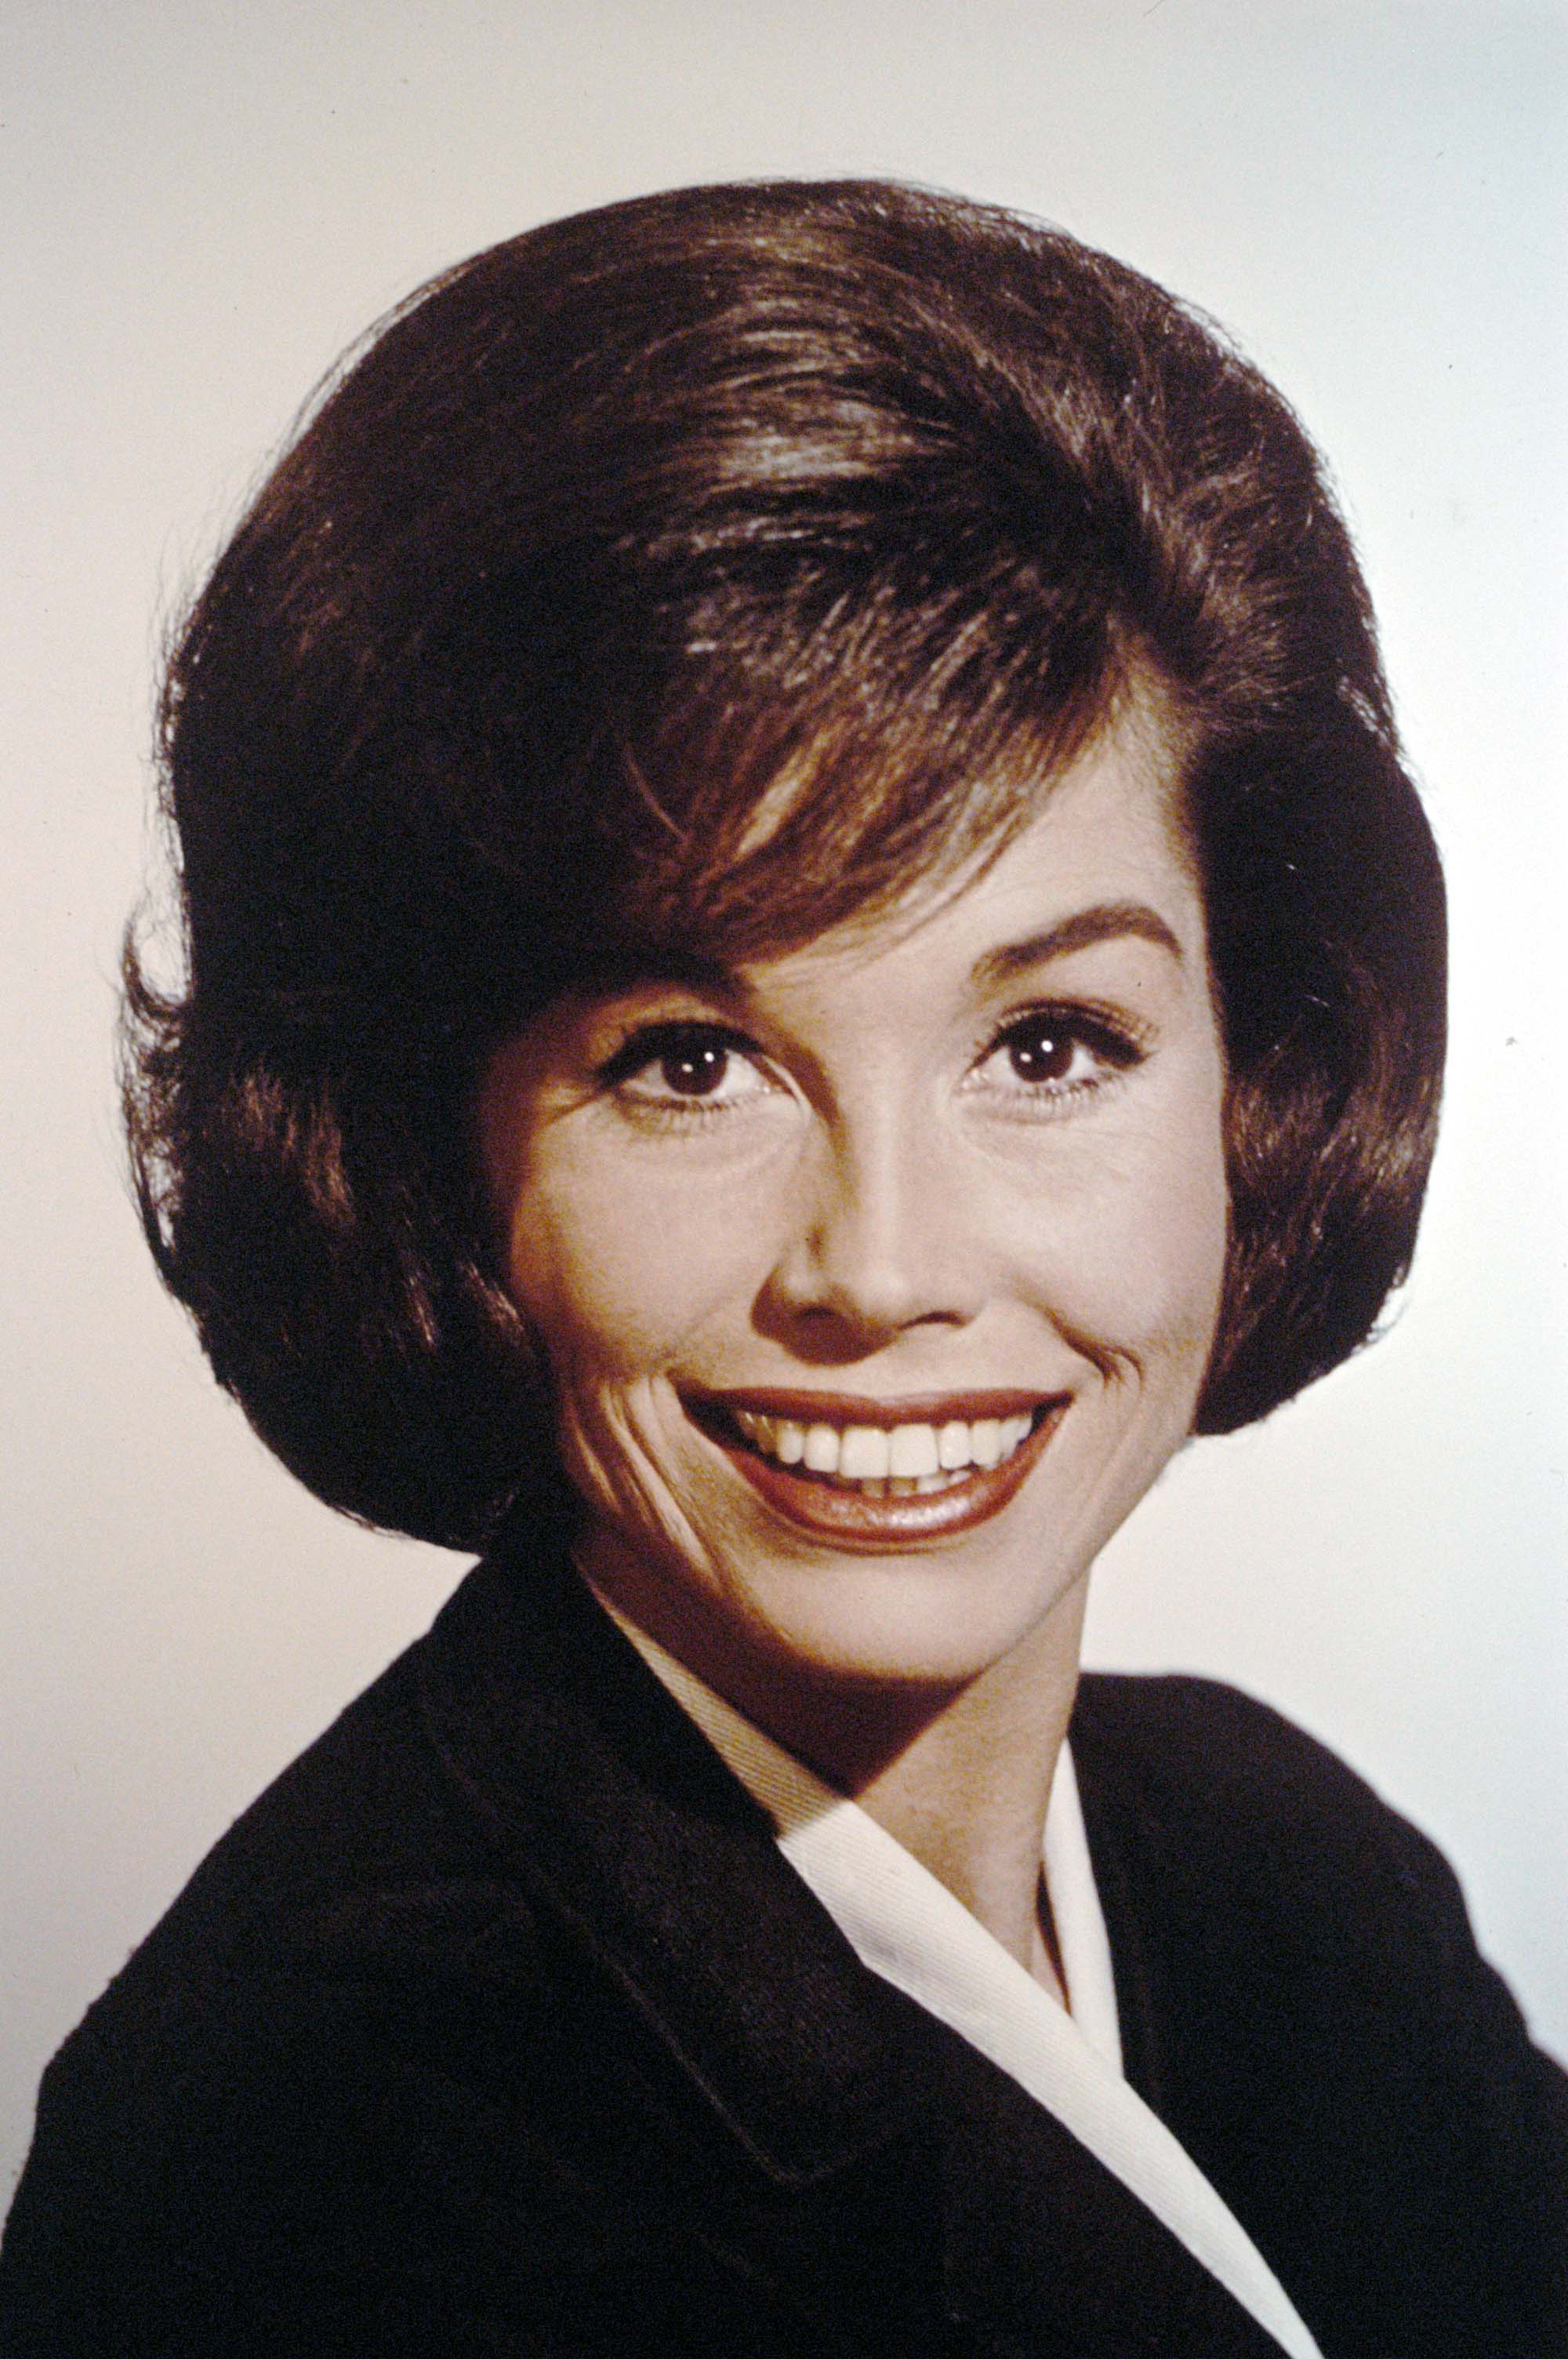 Pictured: An undated image of "The Dick Van Dyke Show" alum Mary Tyler Moore | Photo: Getty Images